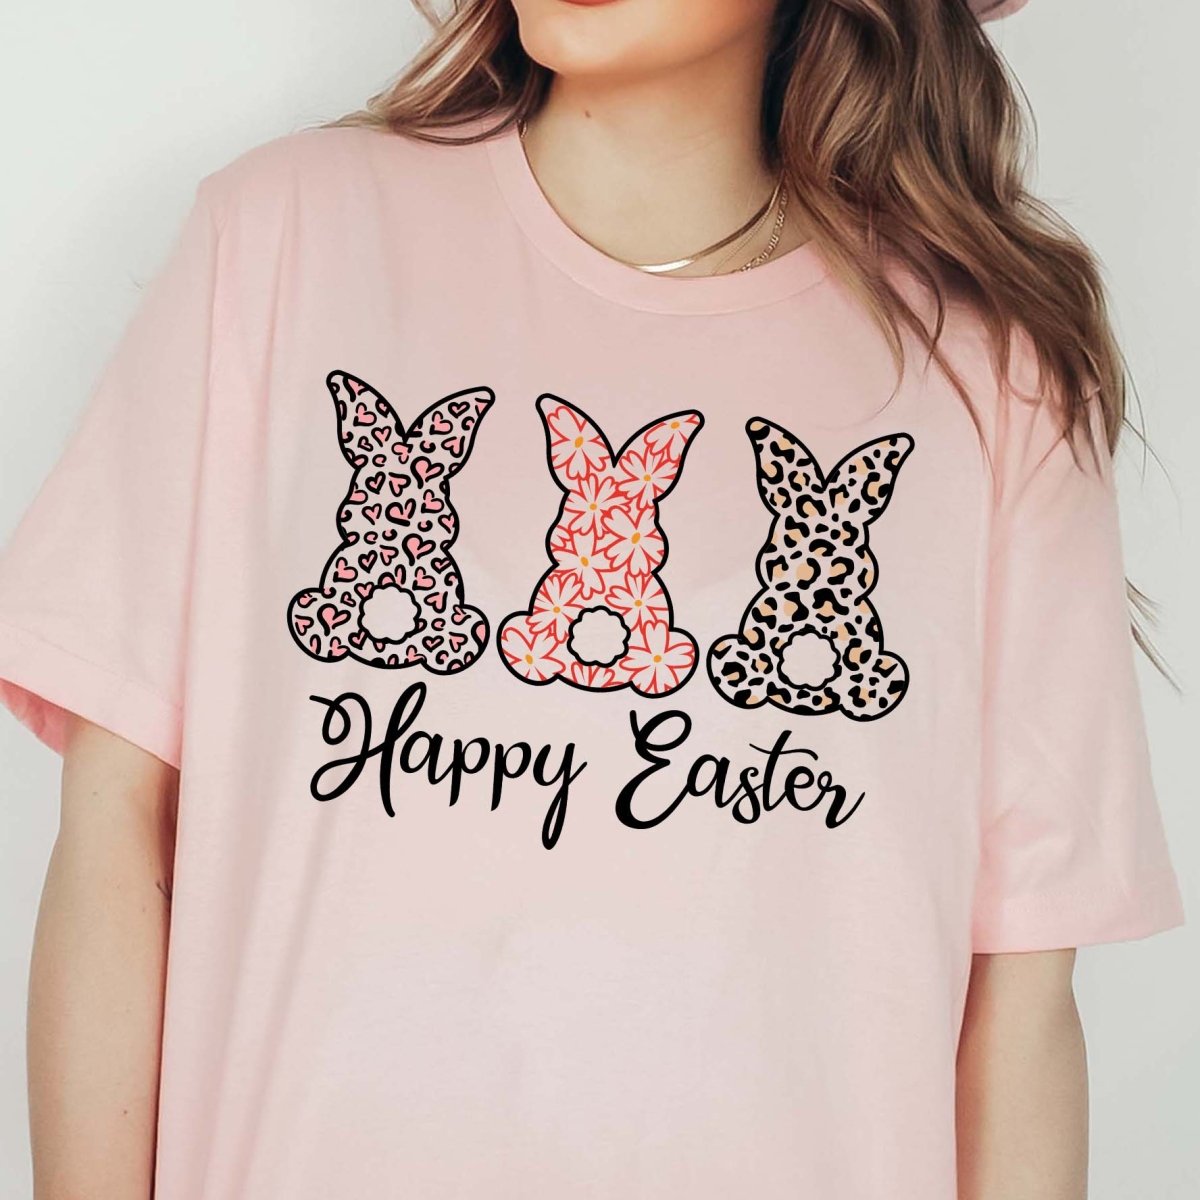 Patterned Bunnies Wholesale Tee - Limeberry Designs